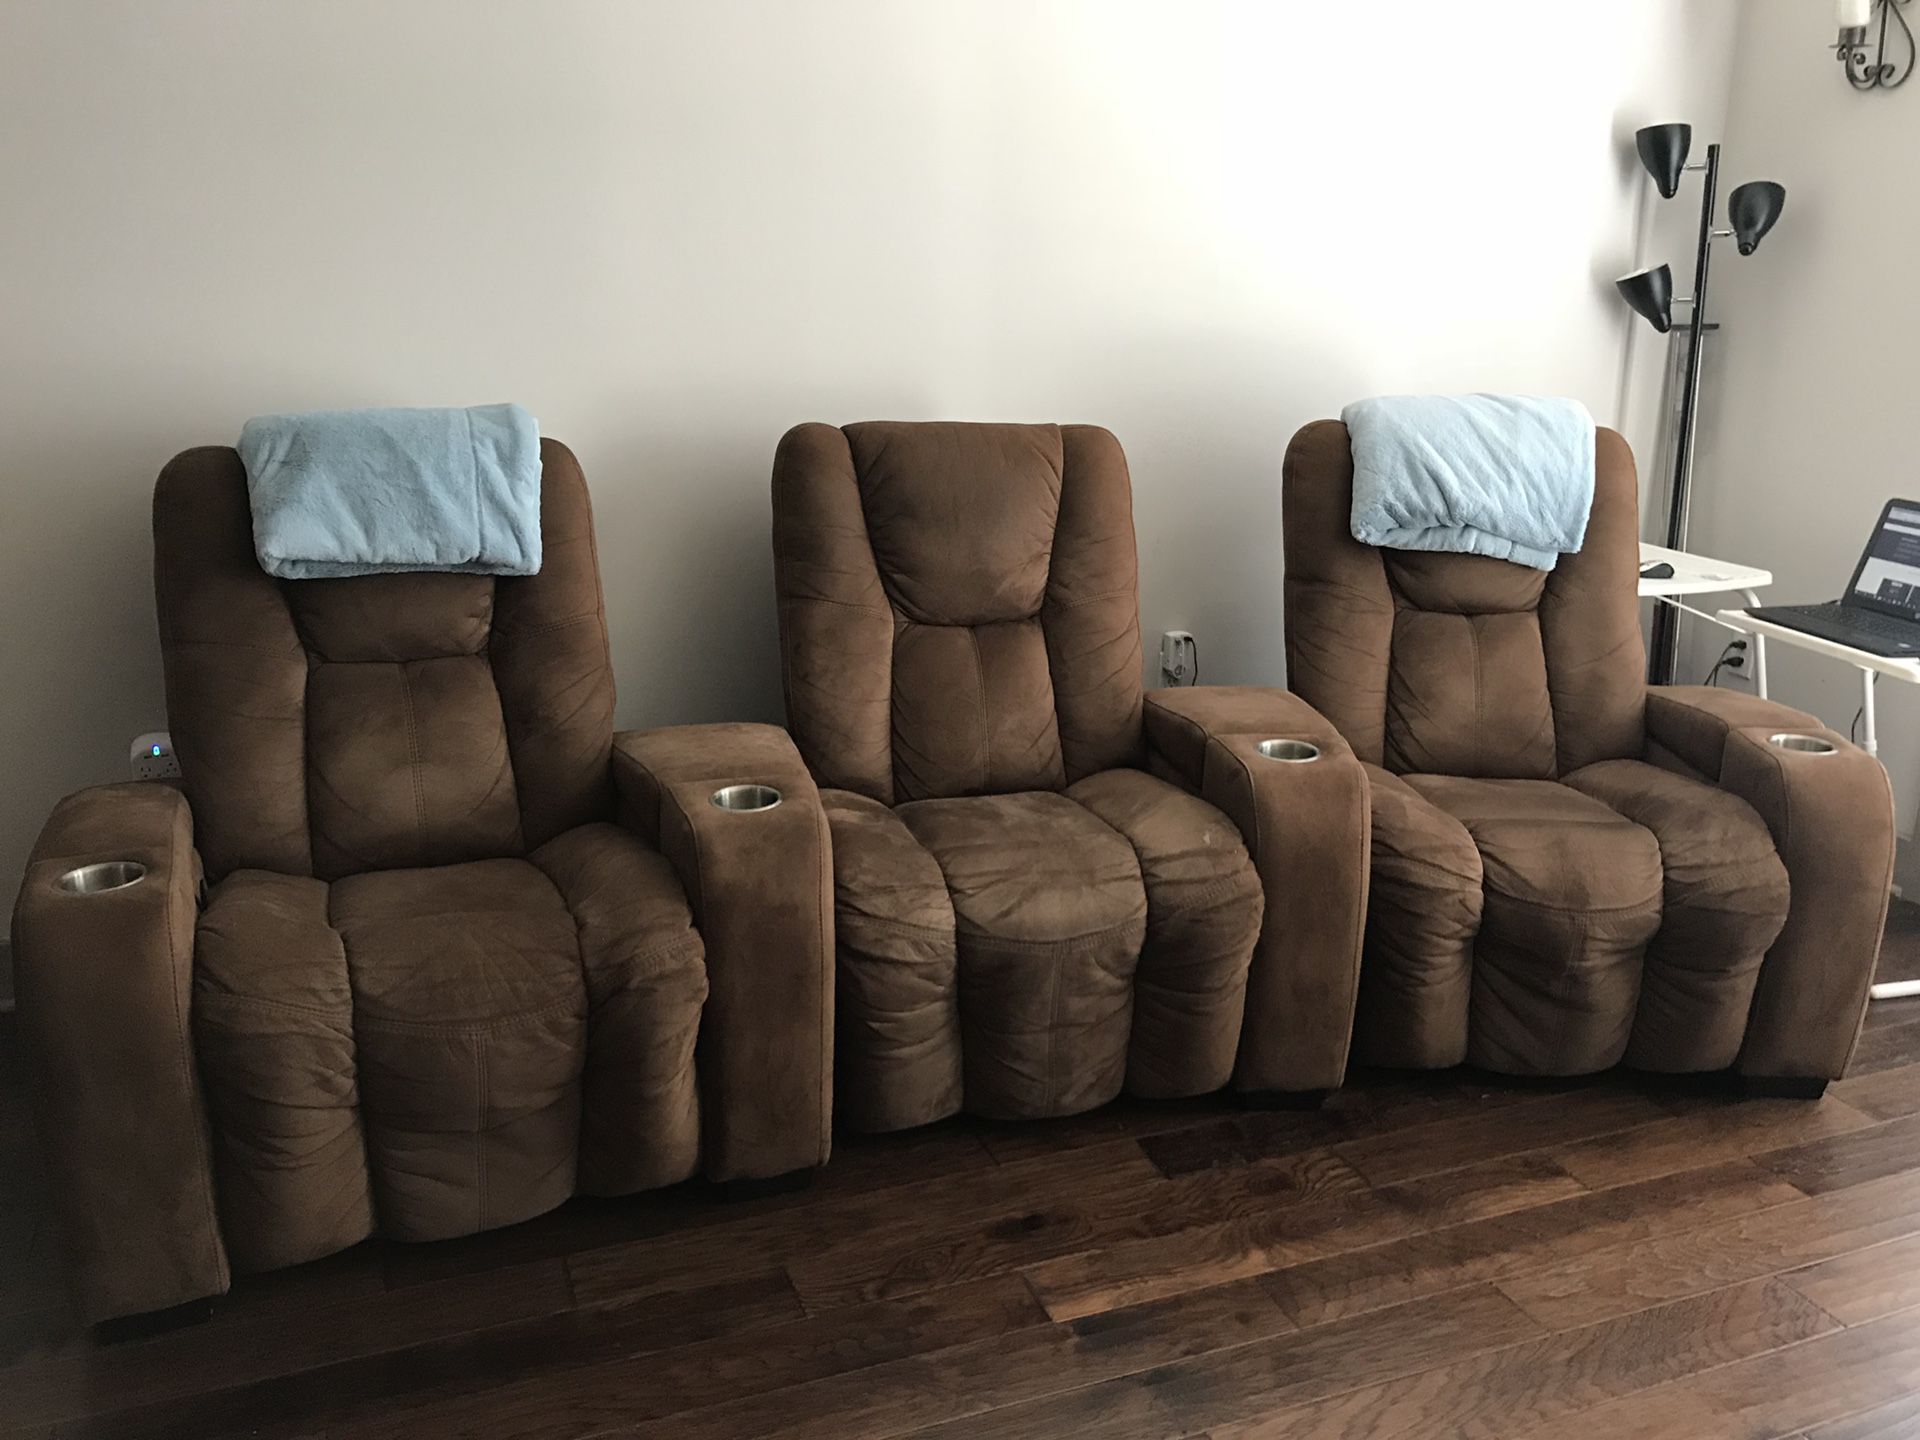 Theater seating recliner couch from Big Screen Store